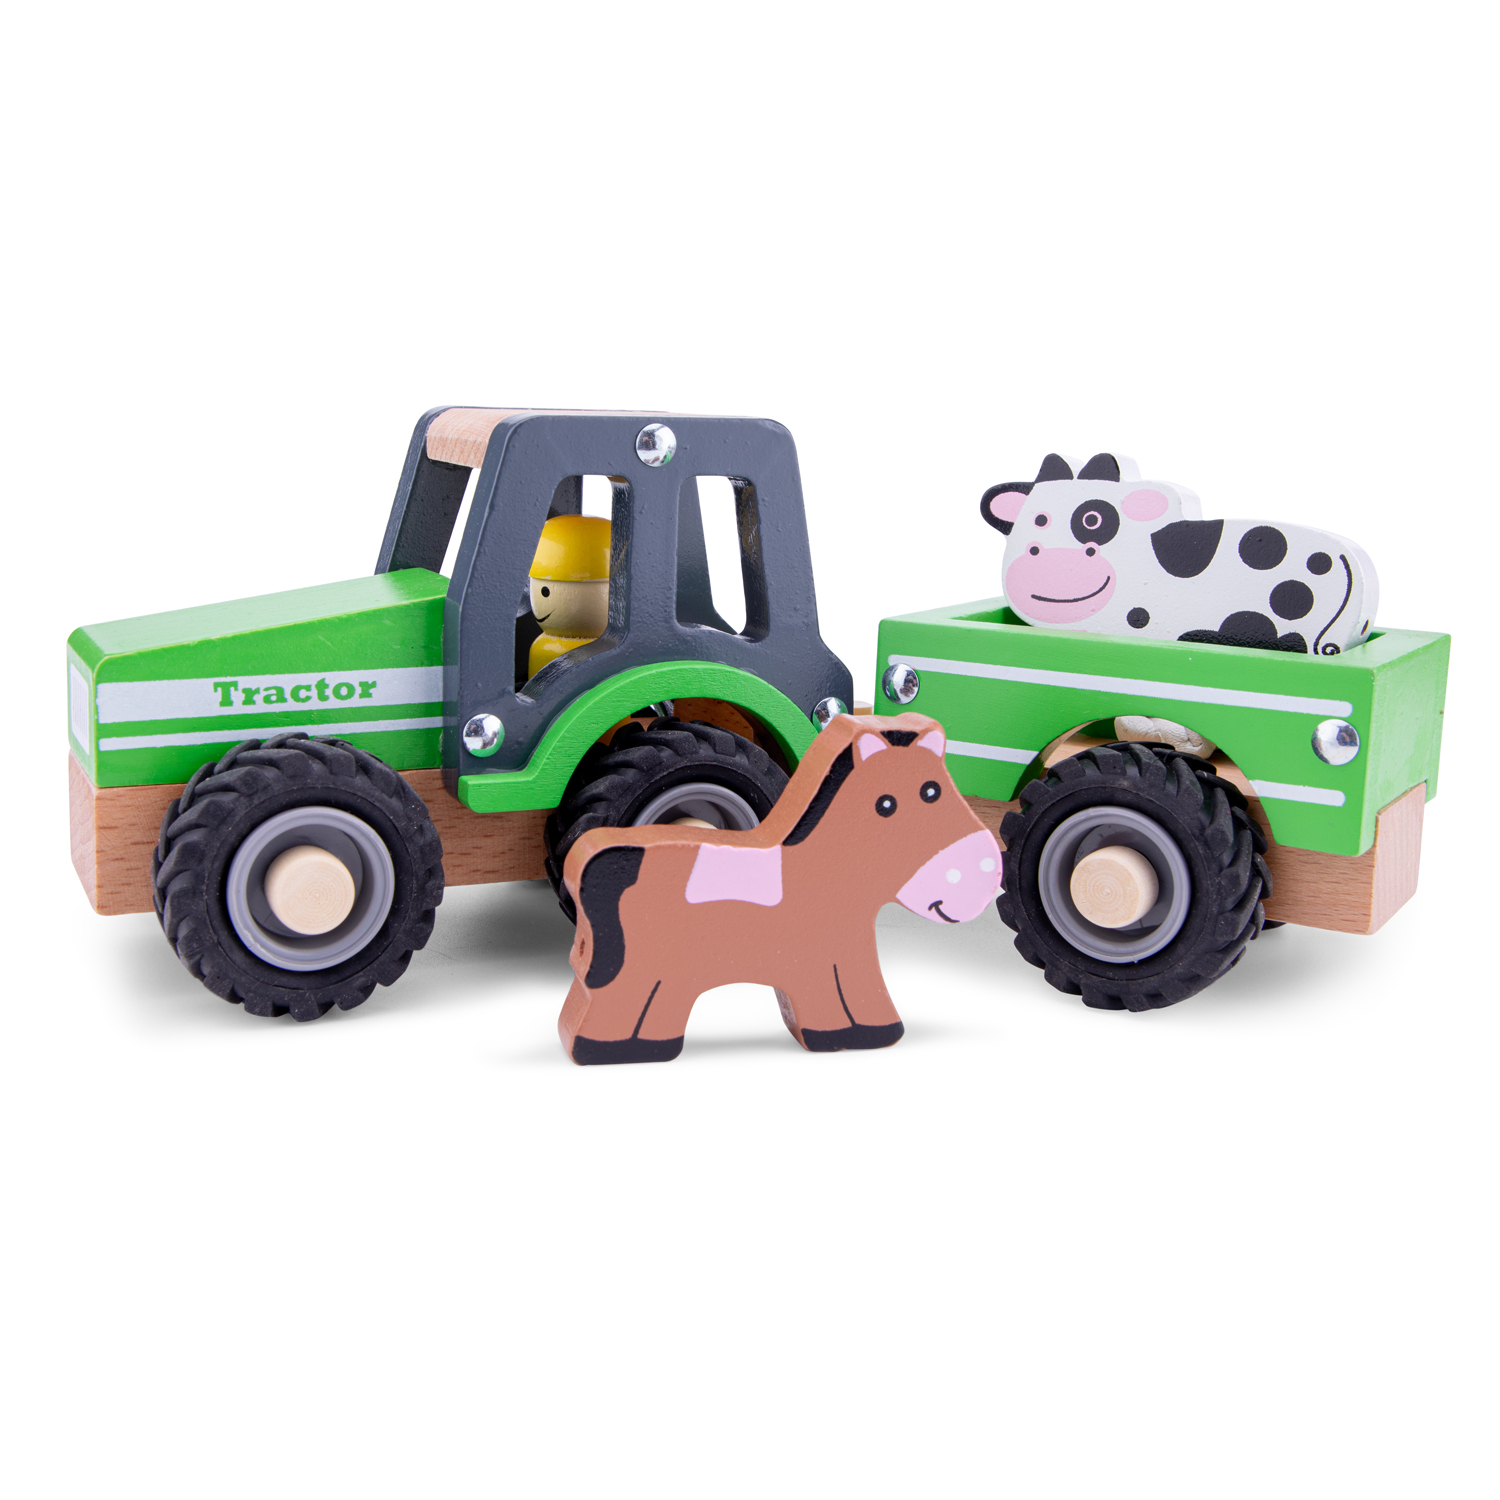 New Classic Toys Wooden Tractor with Trailer and Milk Bottles for Children 18 Months and Up Boys and Girls Baby Gifts 